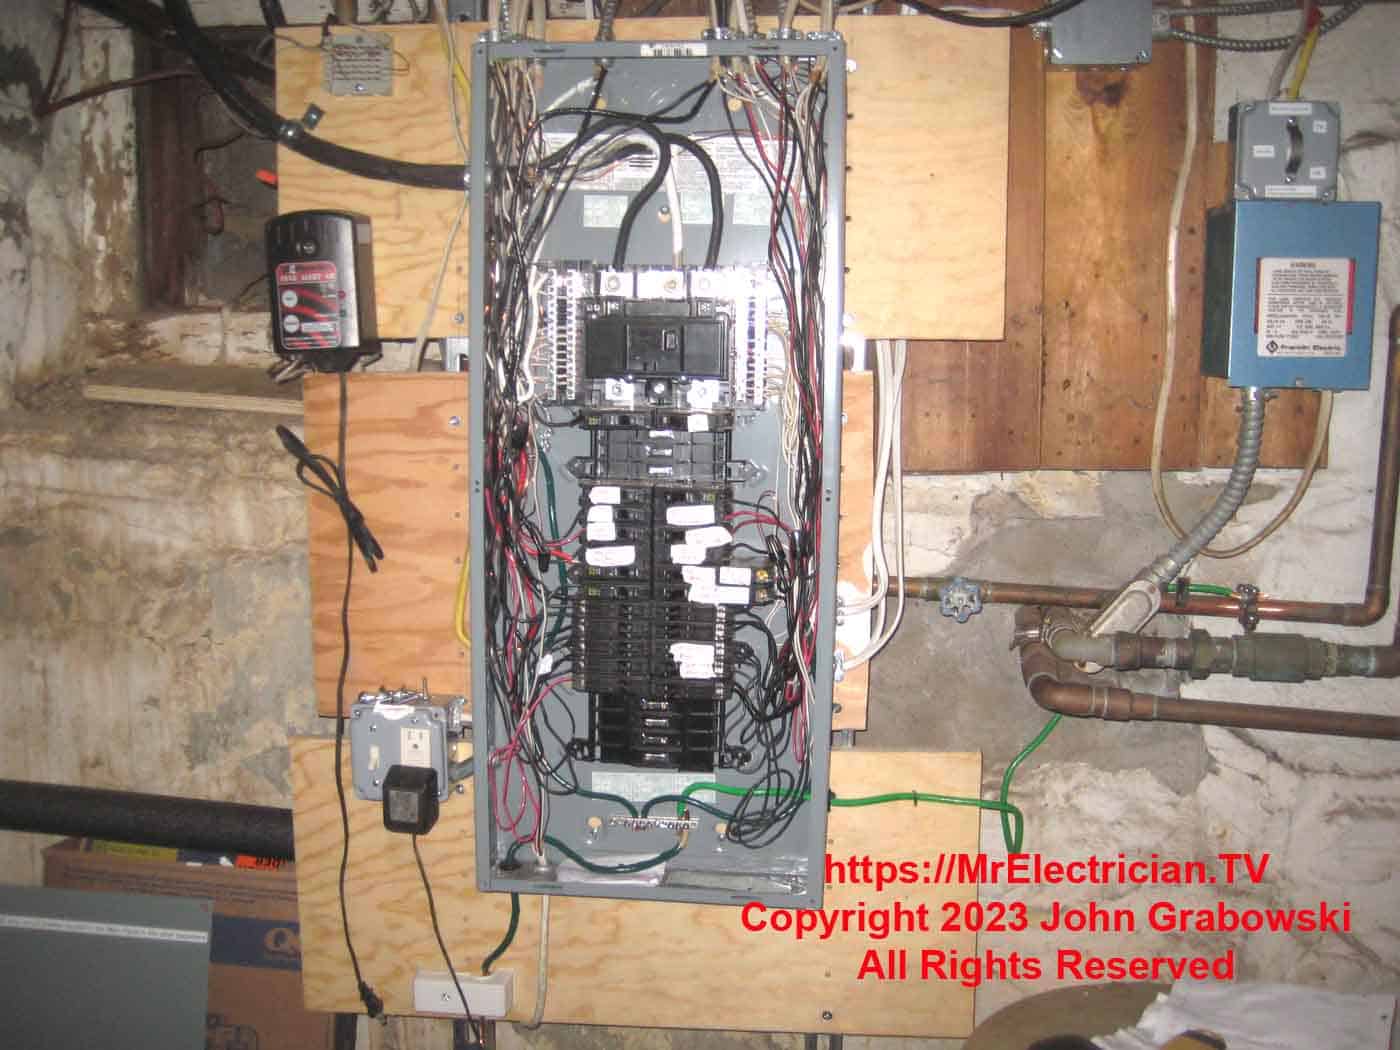 A new basement Square D sub-panel to replace two older sub-panels.